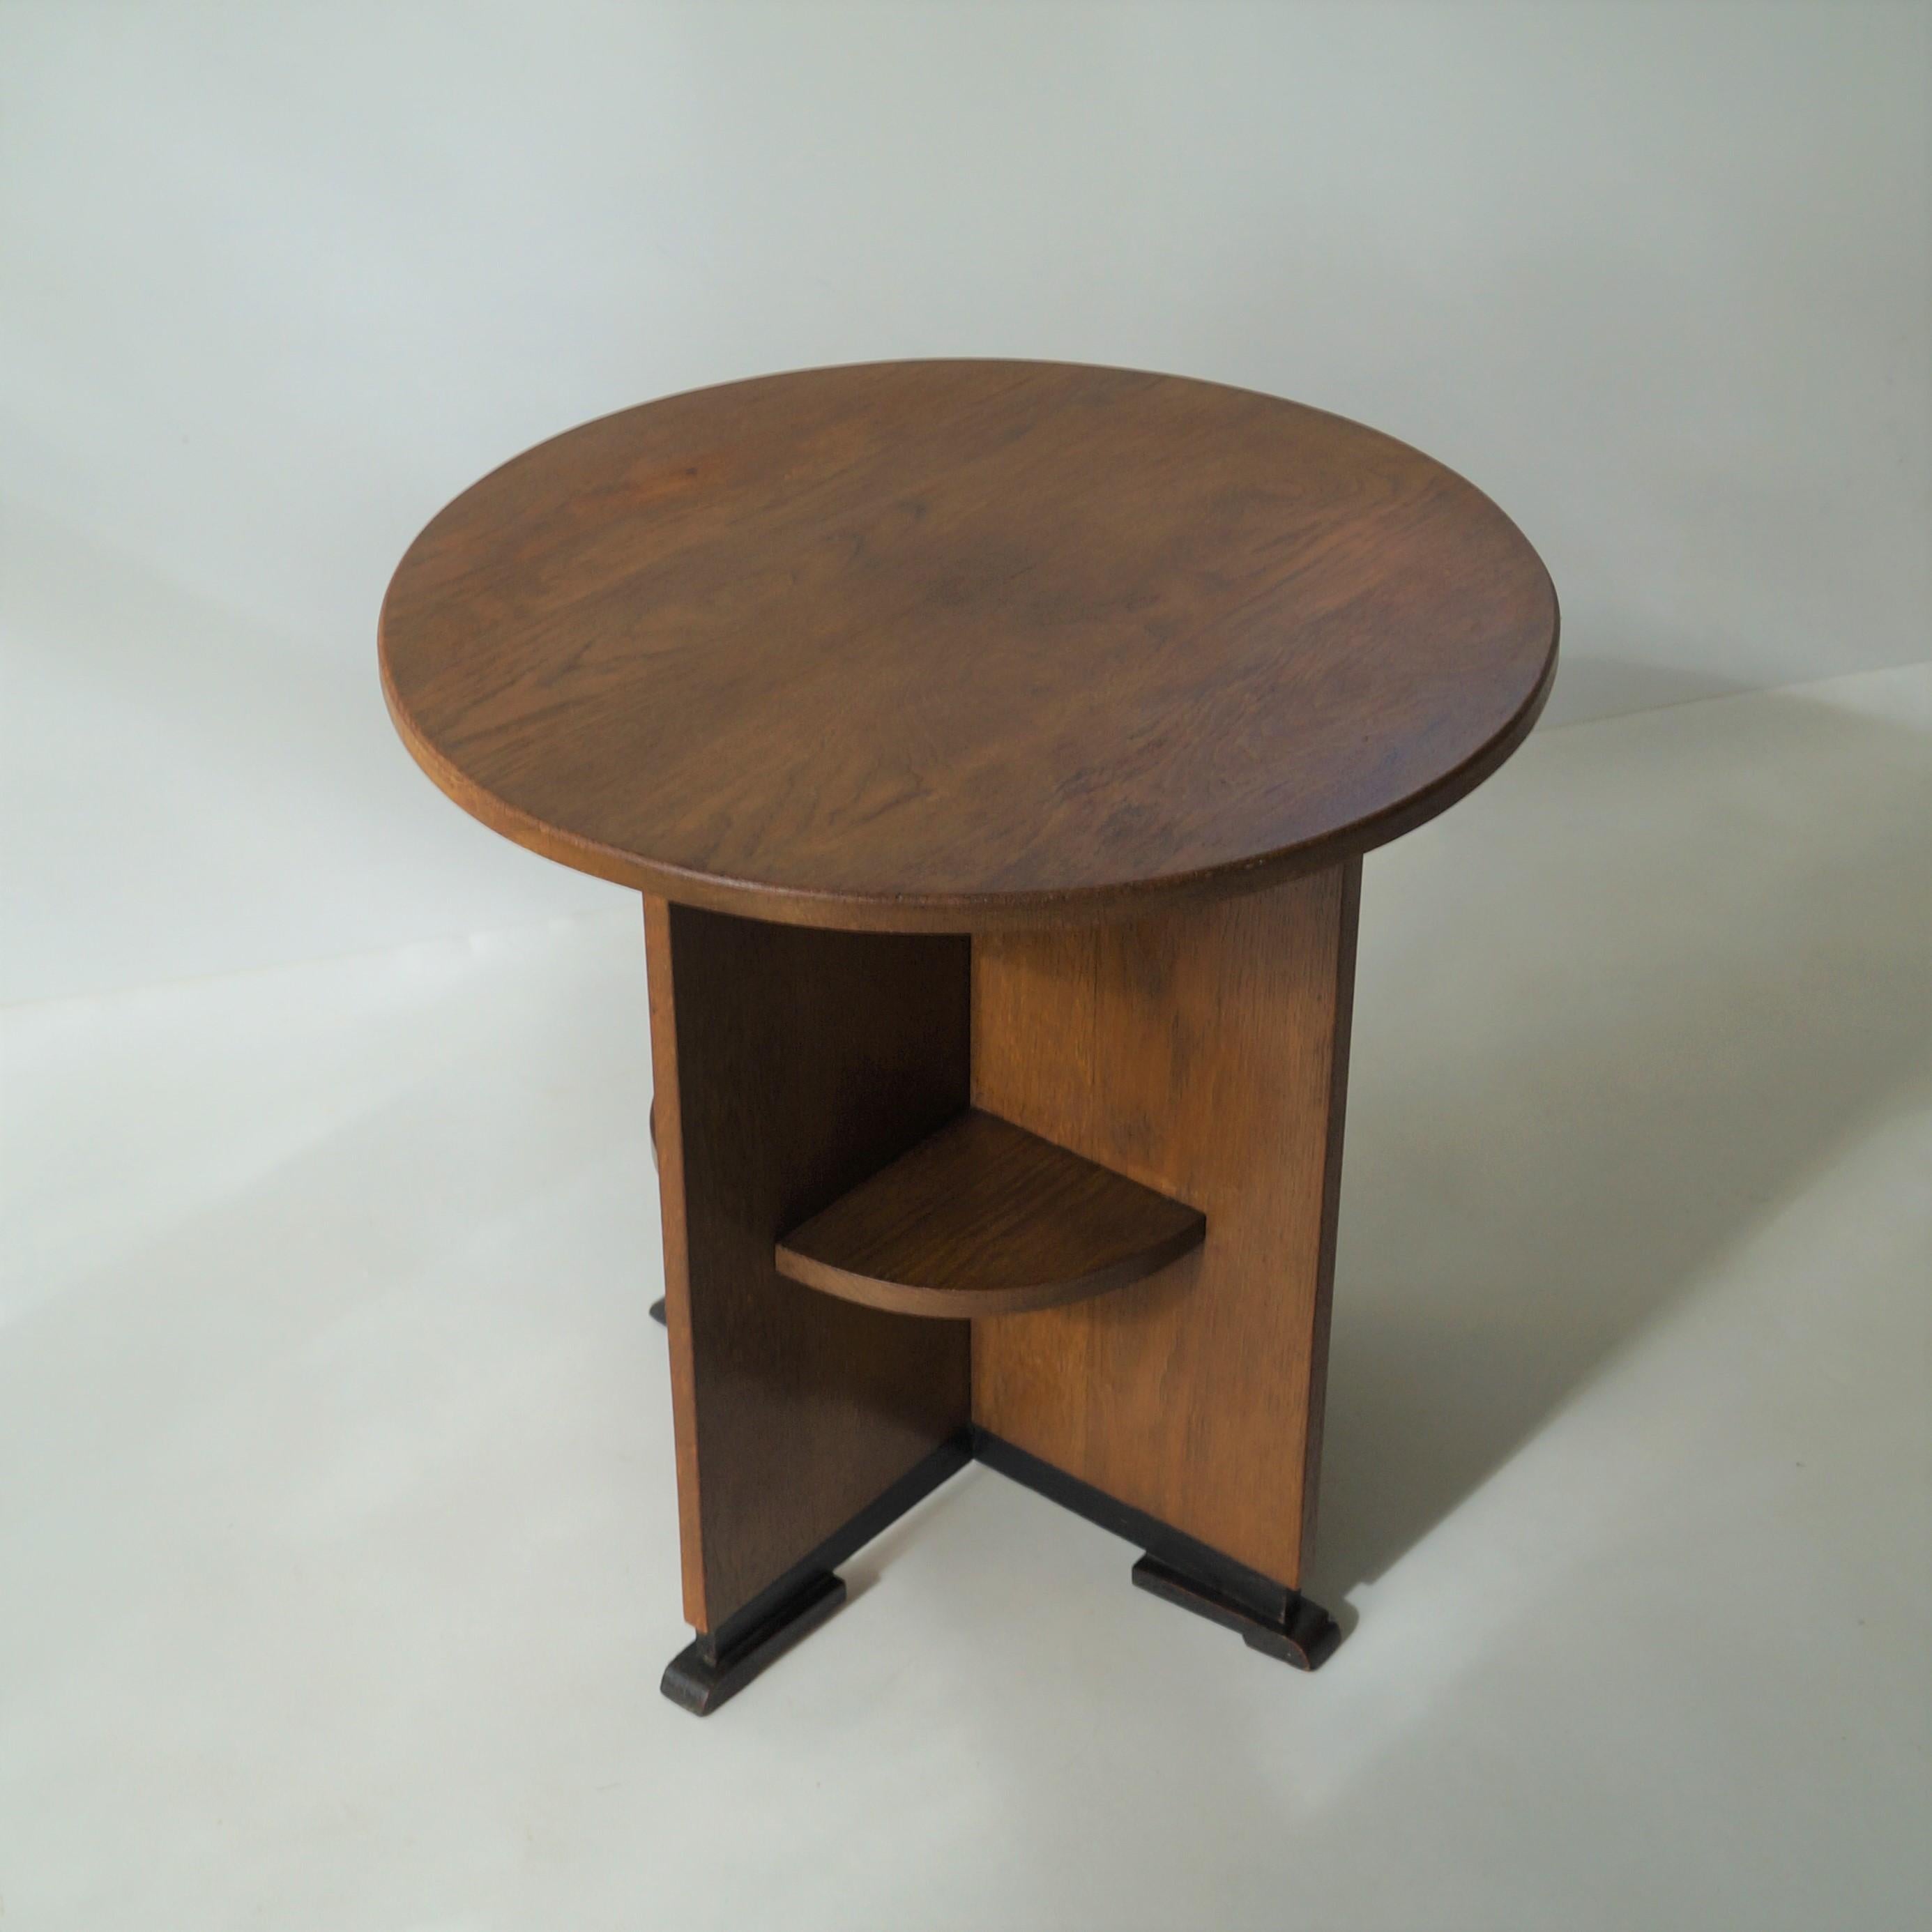 Dutch Art Deco (Haagse School) Occasional Table with Modernist Lines, 1920s 9